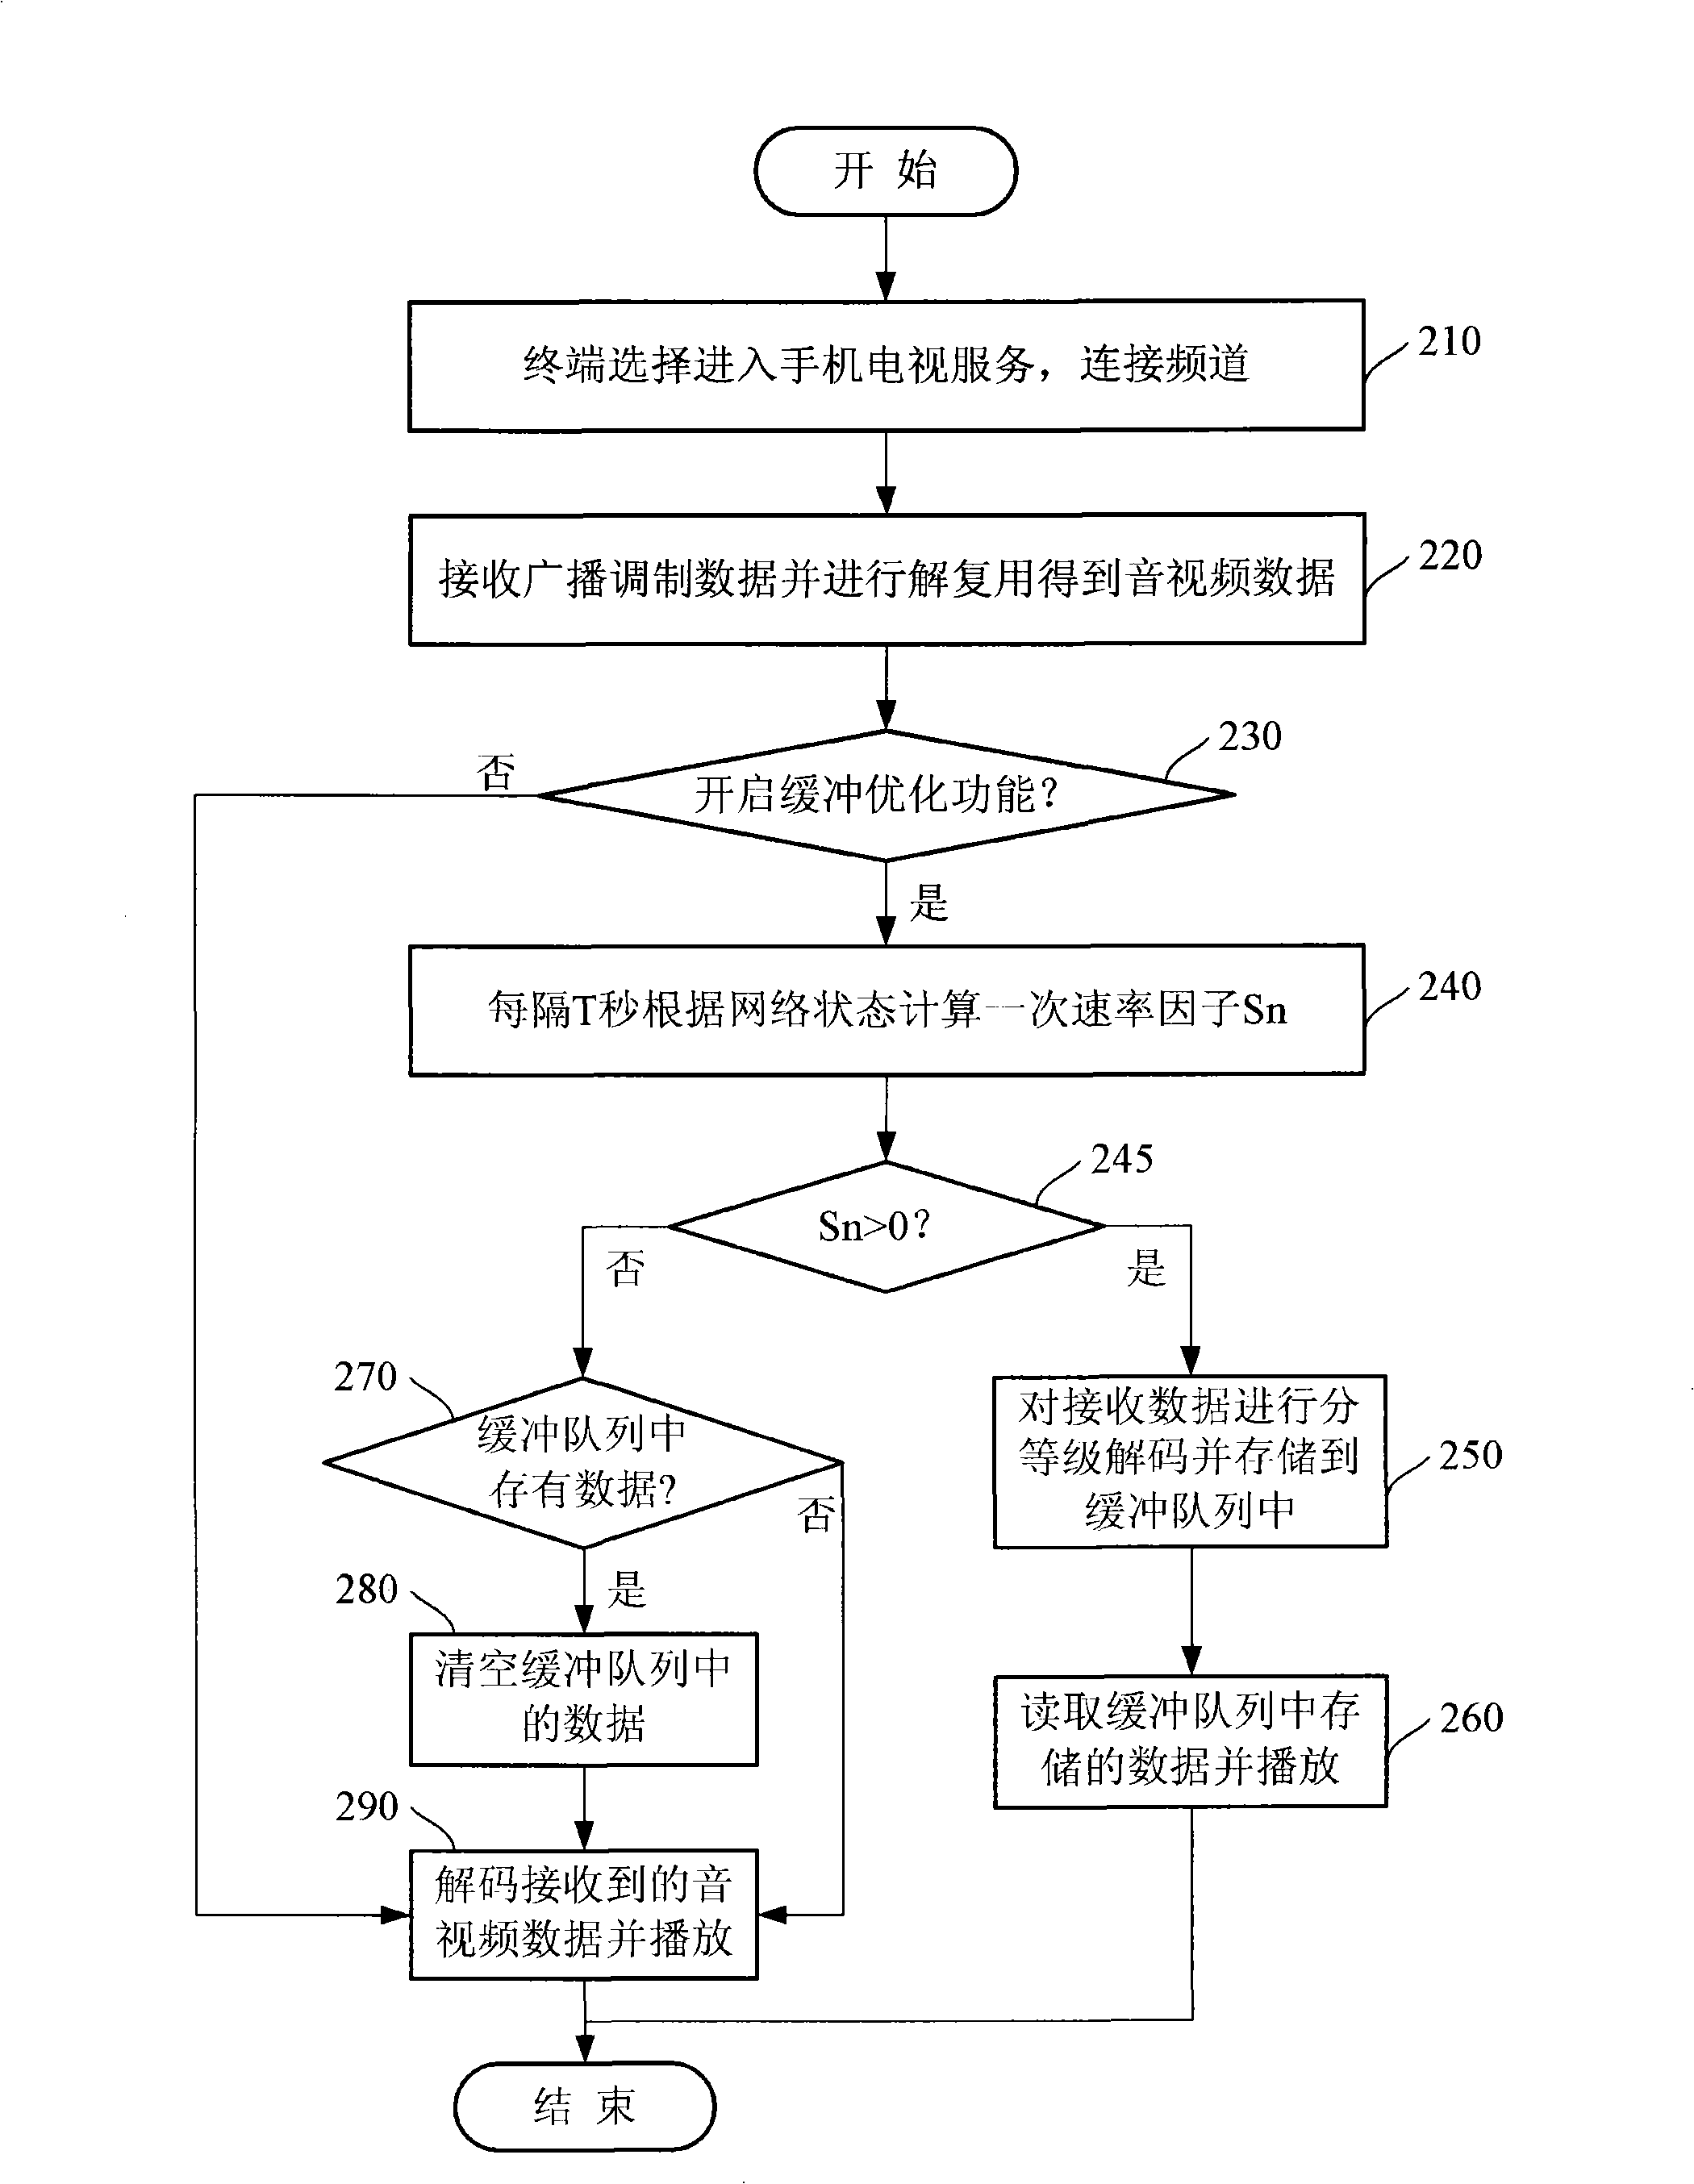 Method for self-adaption adjusting receiving speed to buffer play by a mobile multimedia broadcast terminal